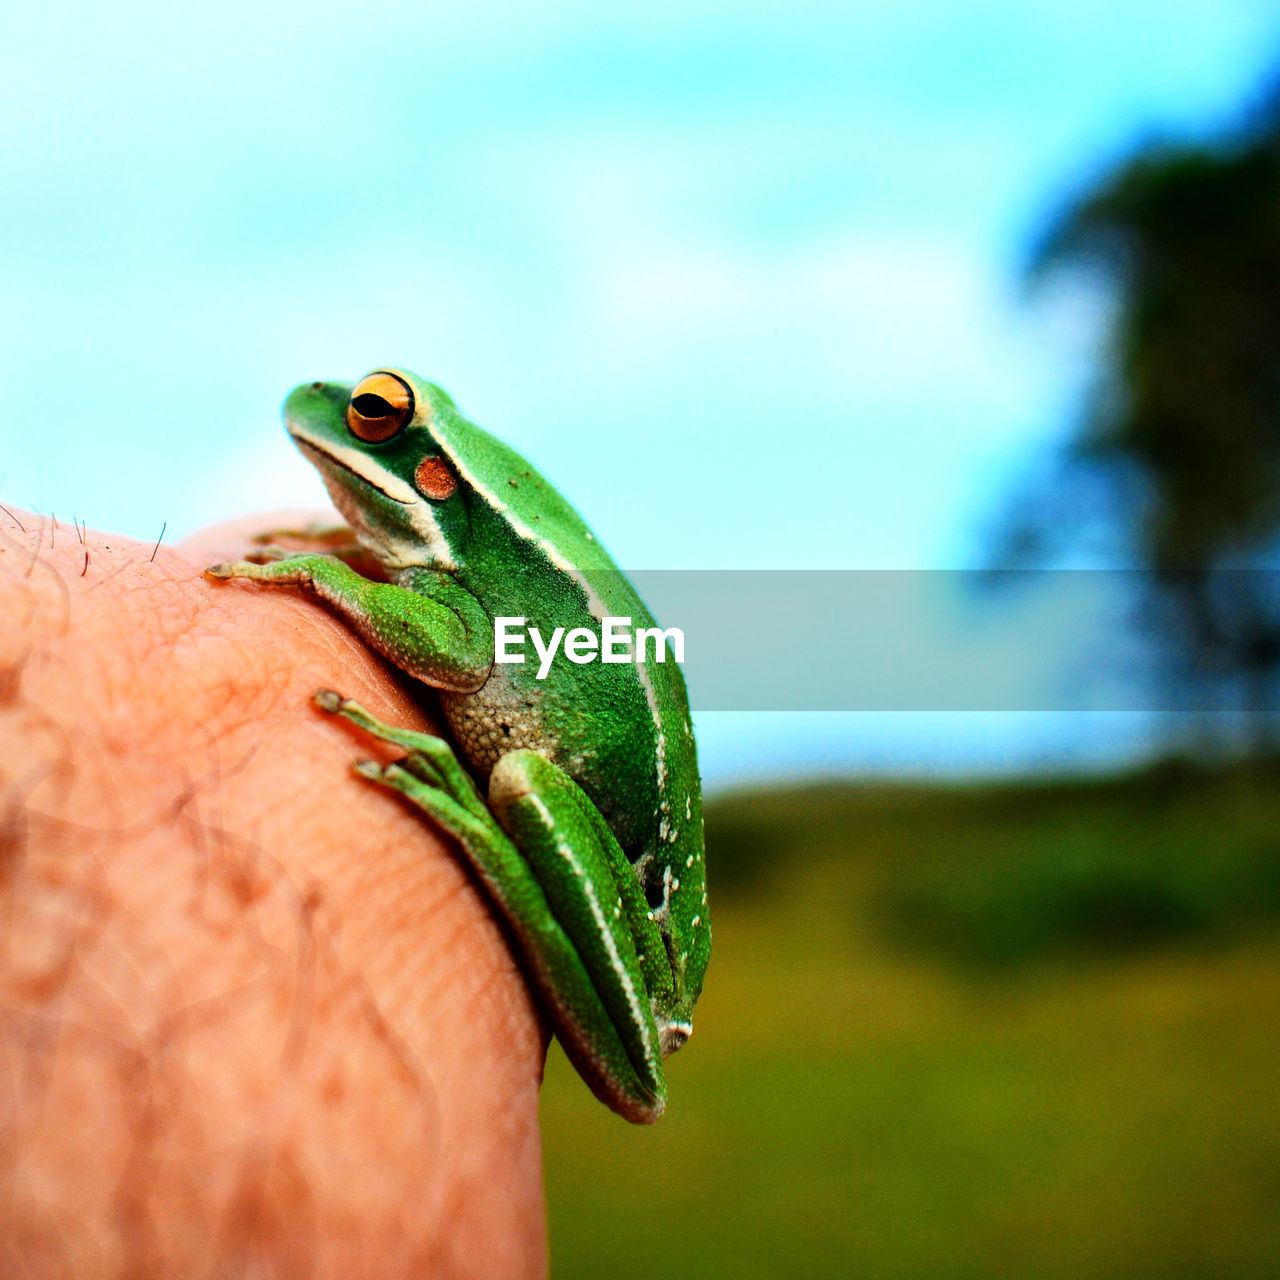 green, animal themes, animal, animal wildlife, one animal, nature, hand, wildlife, frog, reptile, close-up, macro photography, tree frog, amphibian, lizard, day, one person, focus on foreground, outdoors, holding, plant, environment, finger, tree